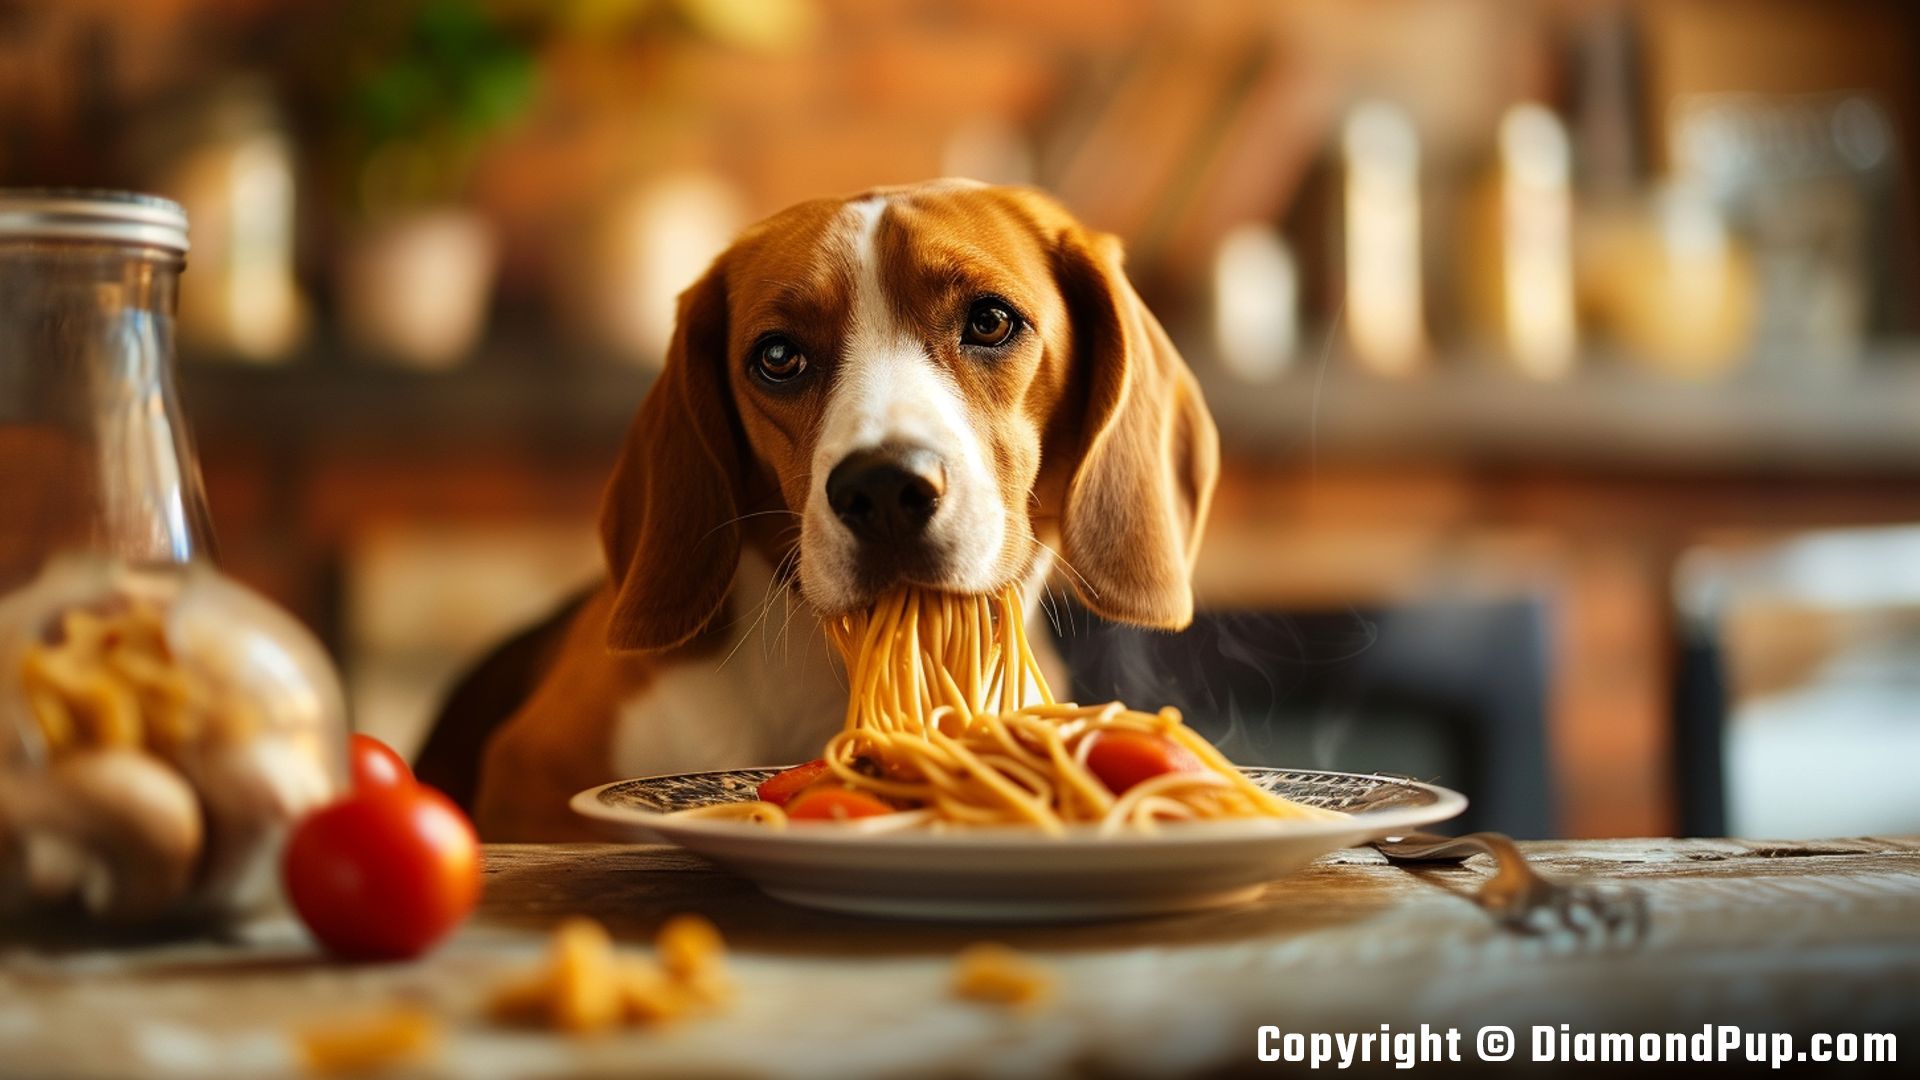 Image of a Cute Beagle Snacking on Pasta